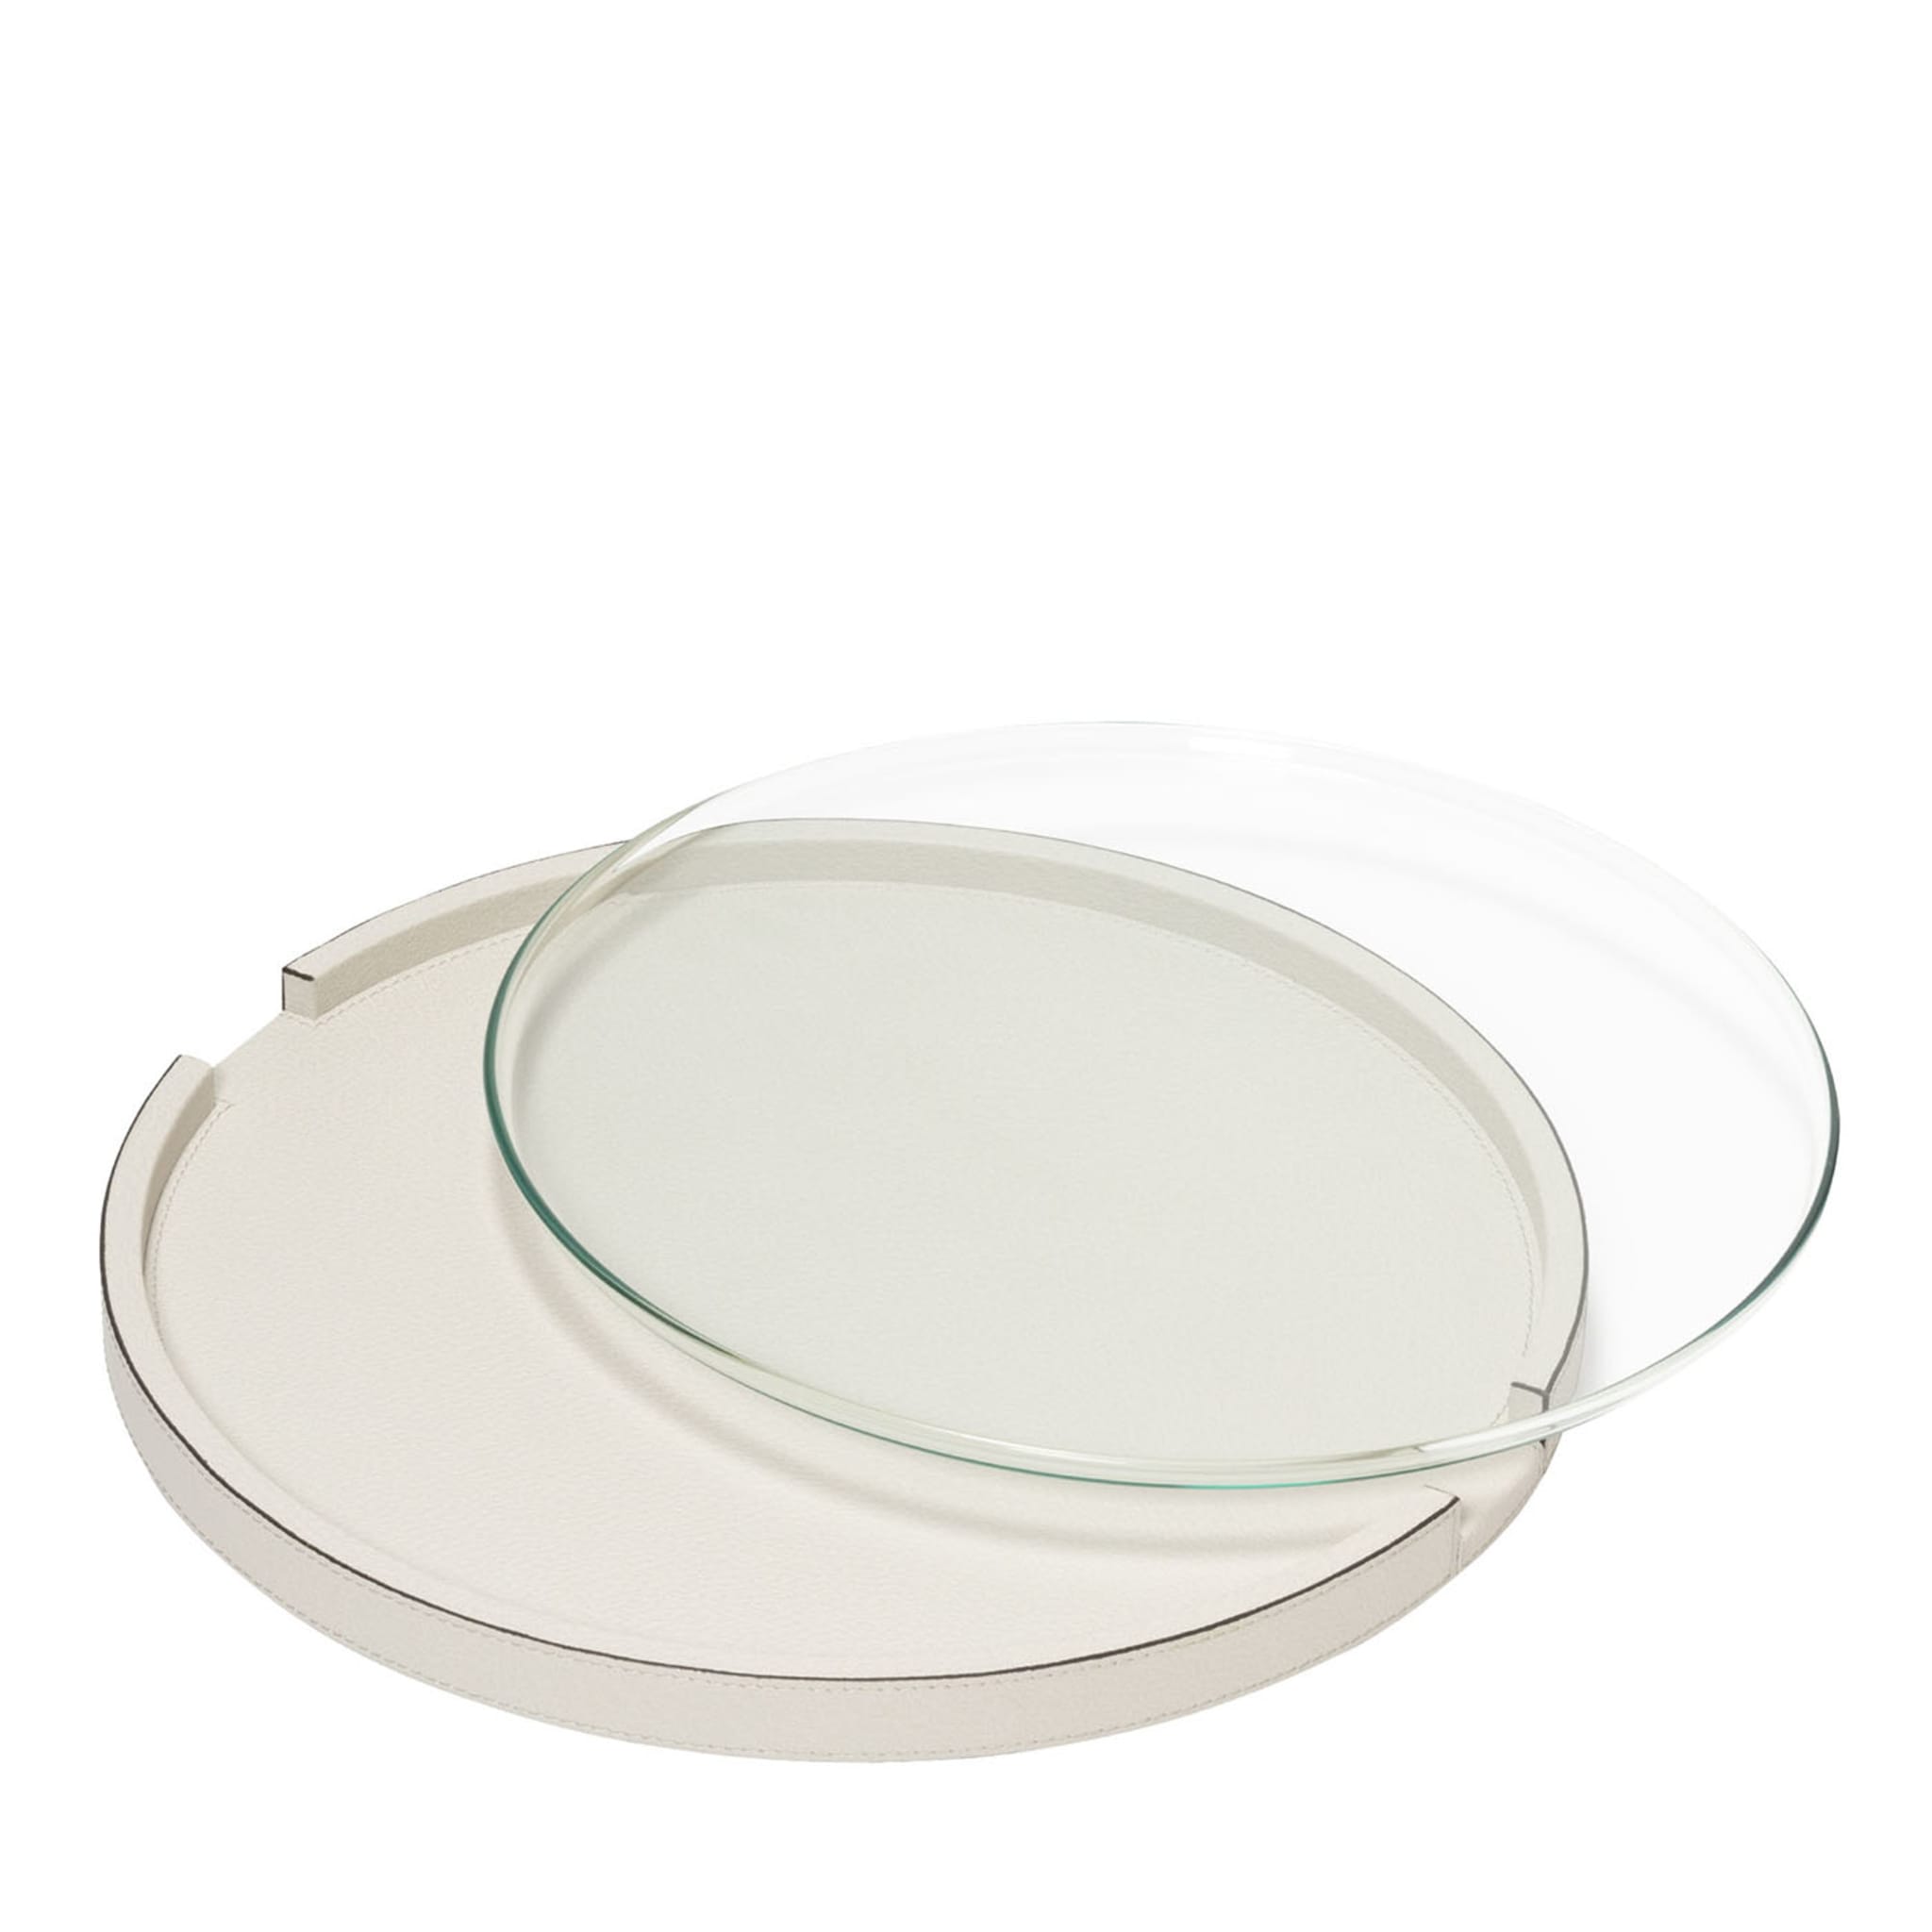 Gourmet Round Serving Tray #3 - Main view